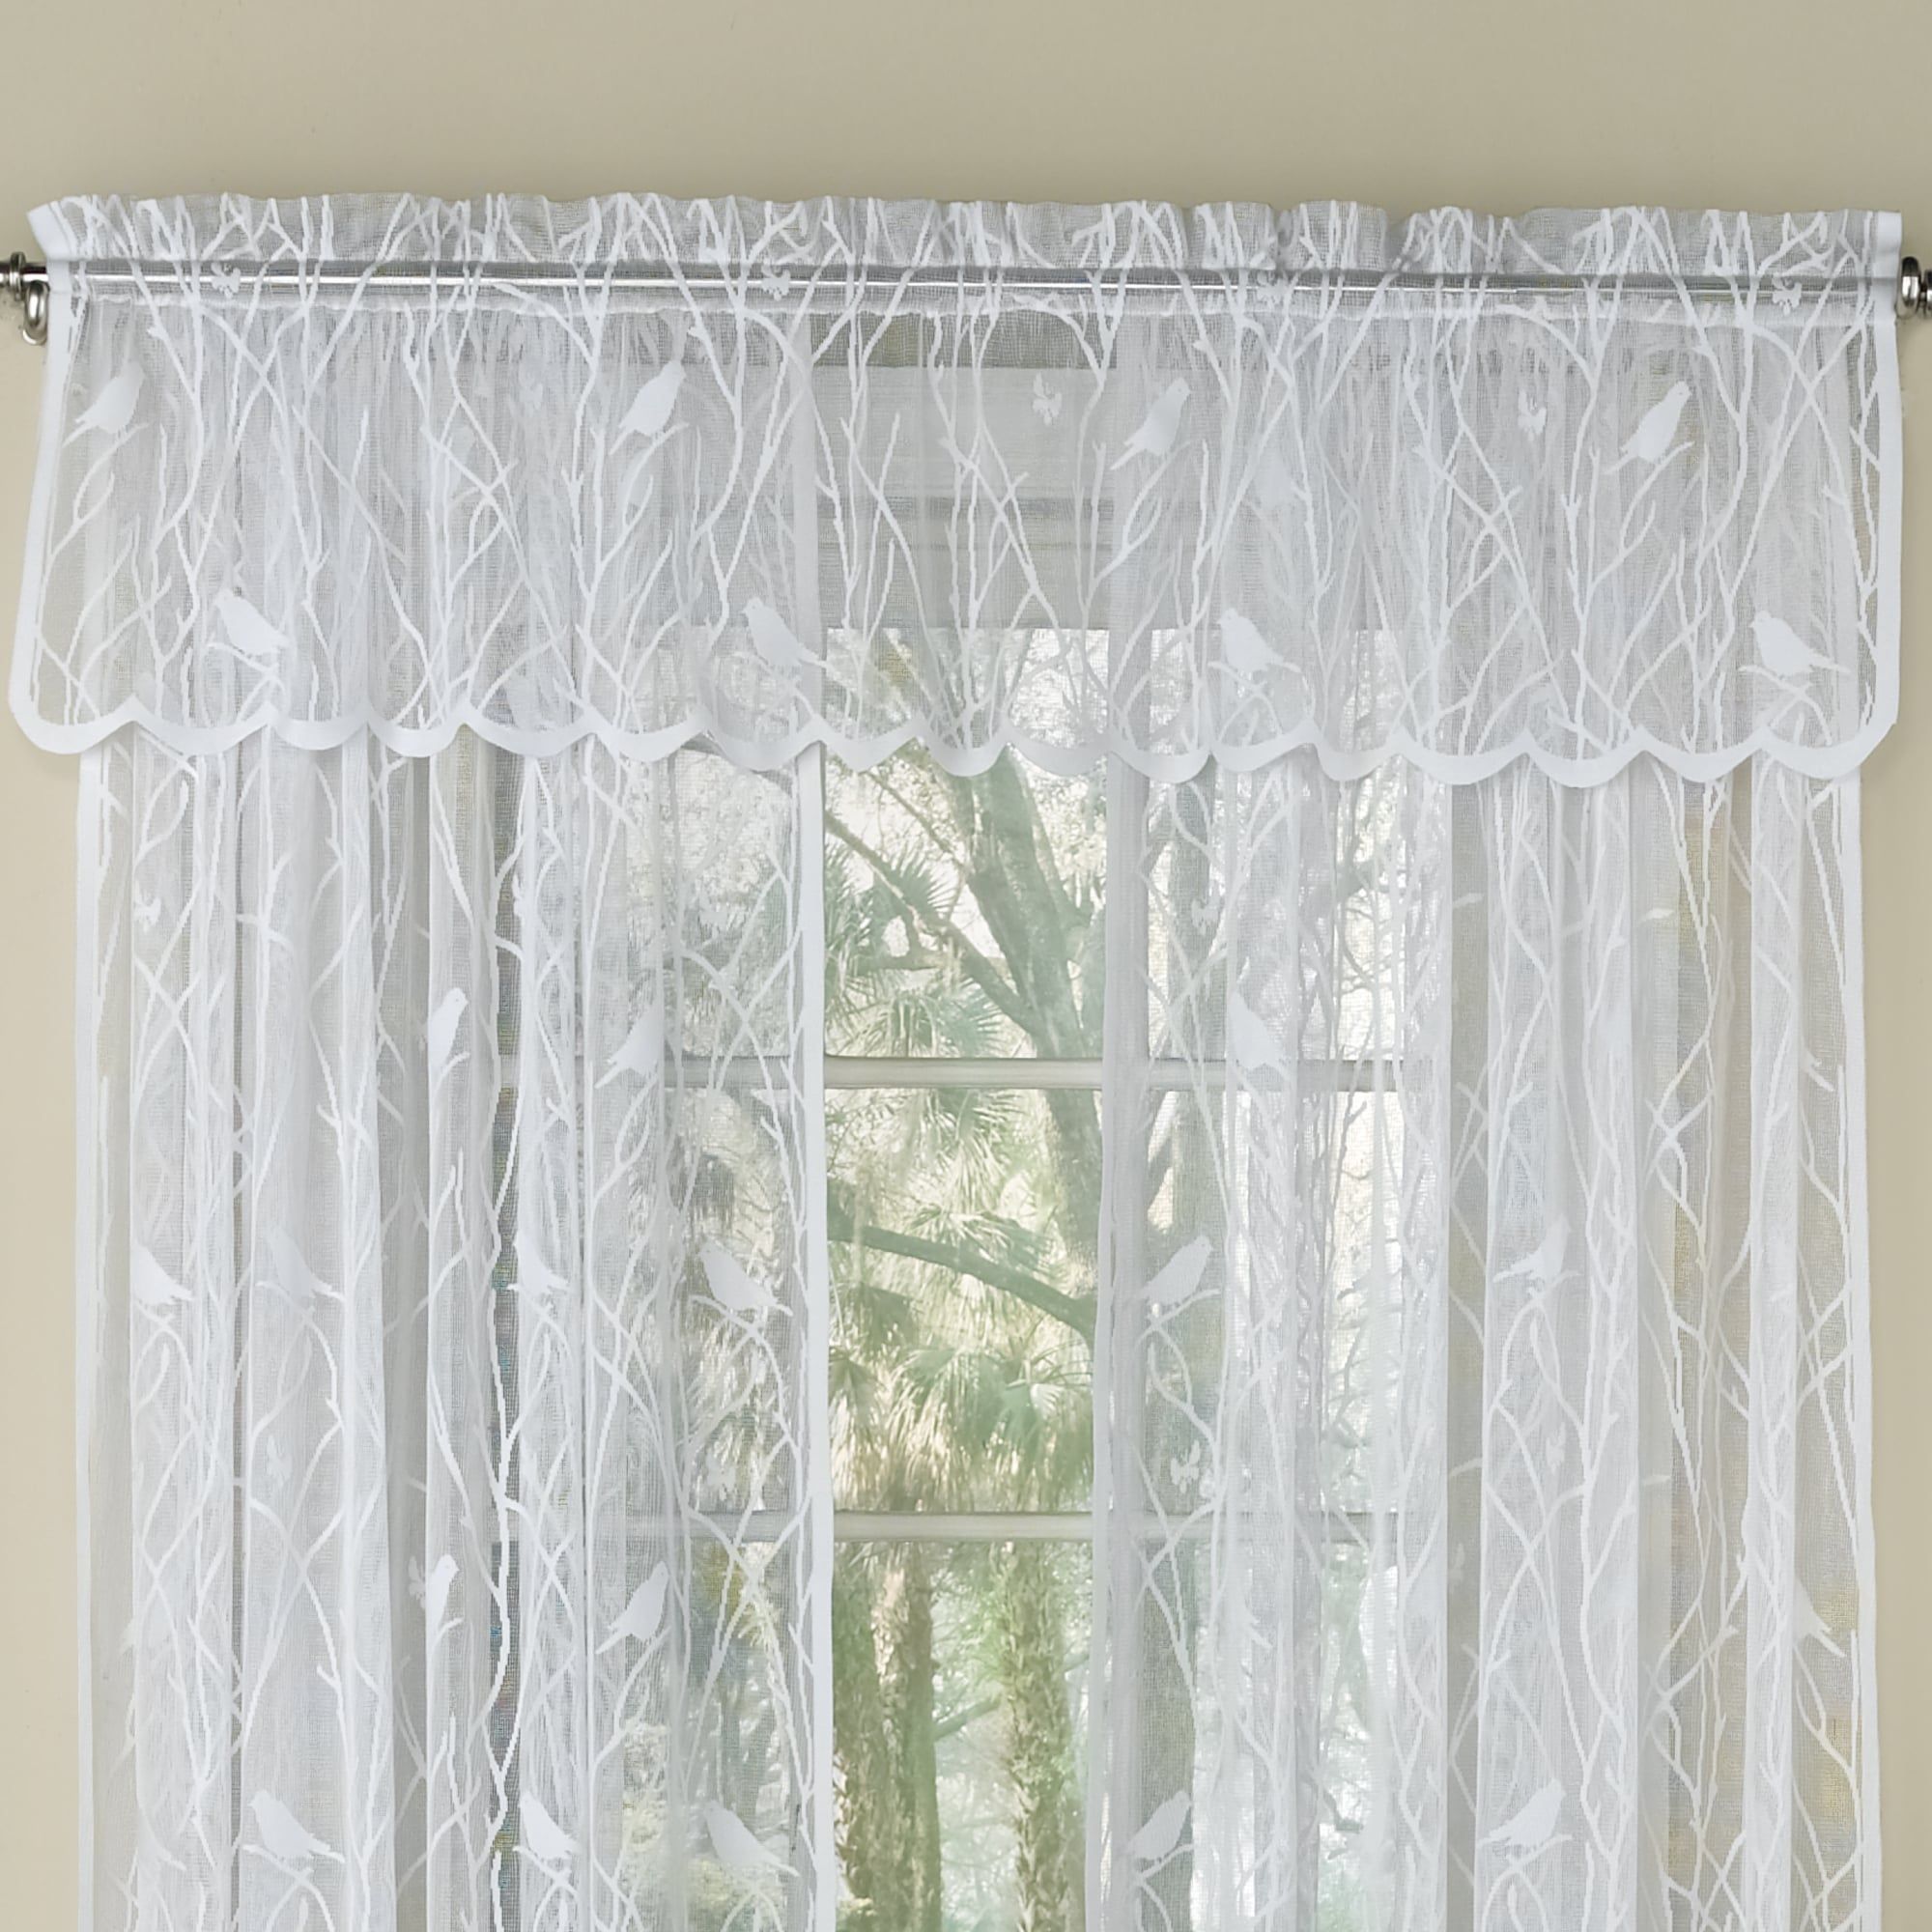 Sweet Home Collection White Knit Lace Bird Motif Window Curtain Tiers,  Valance And Swag Pair Options Throughout White Knit Lace Bird Motif Window Curtain Tiers (Photo 3 of 20)